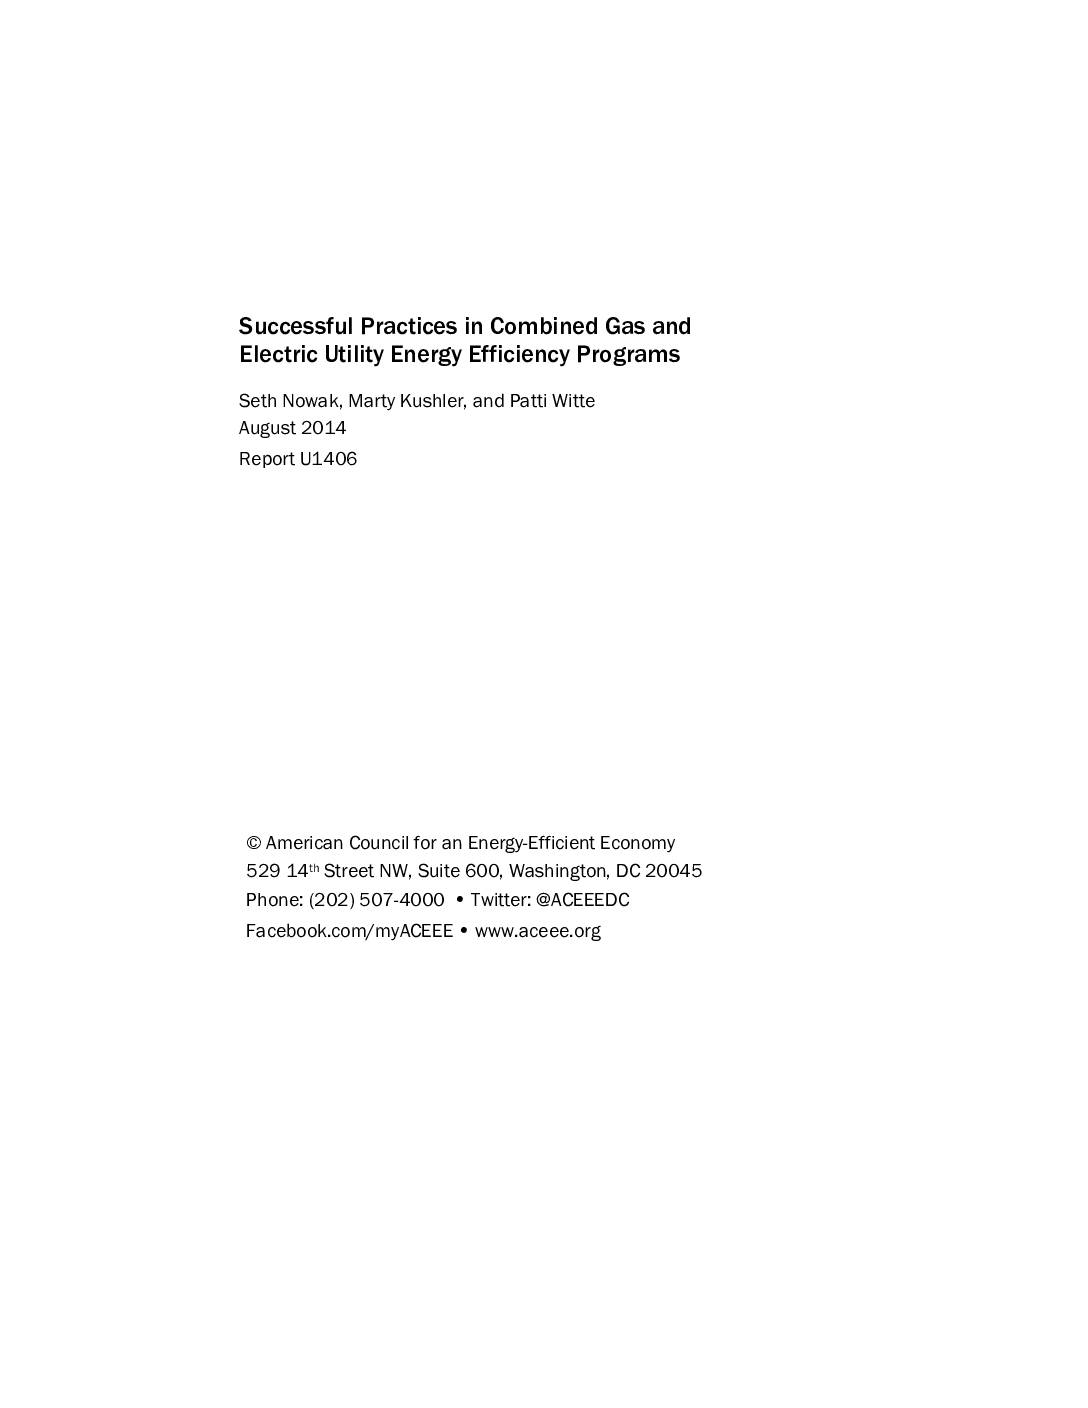 Successful Practices in Combined Gas and Electric Utility Energy Efficiency Programs